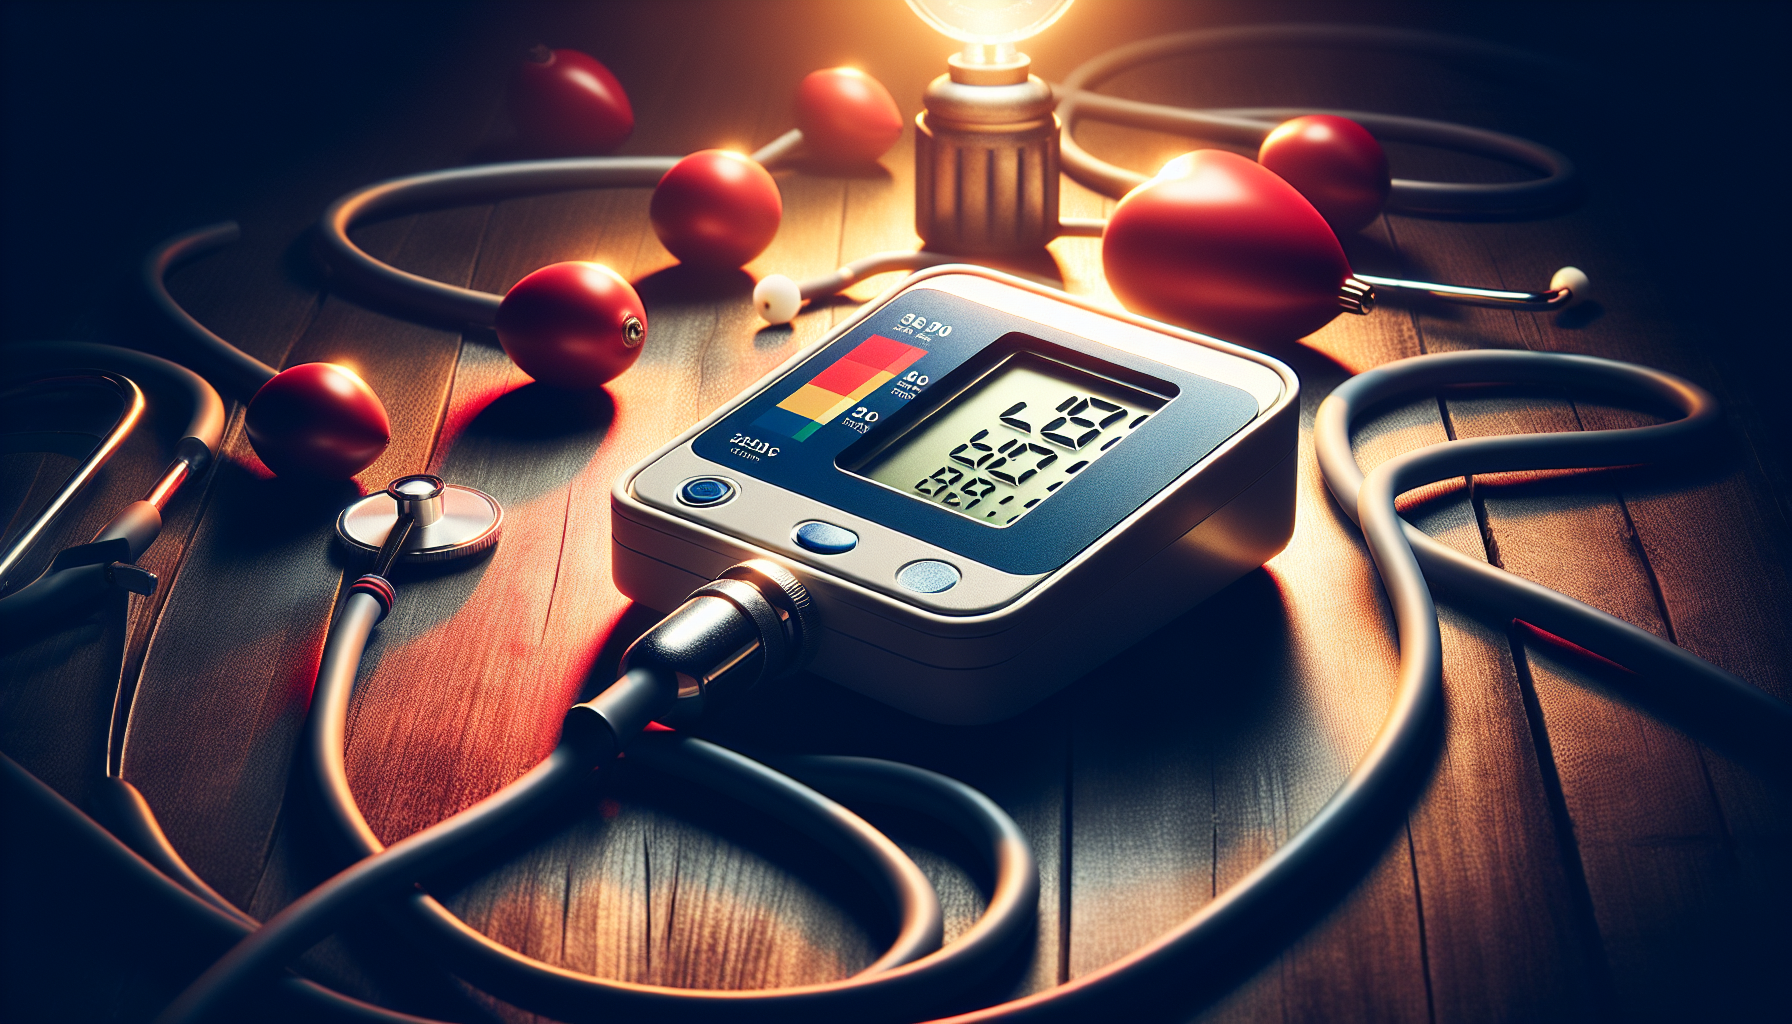 How Do You Physically Feel When Your Blood Pressure Is High?